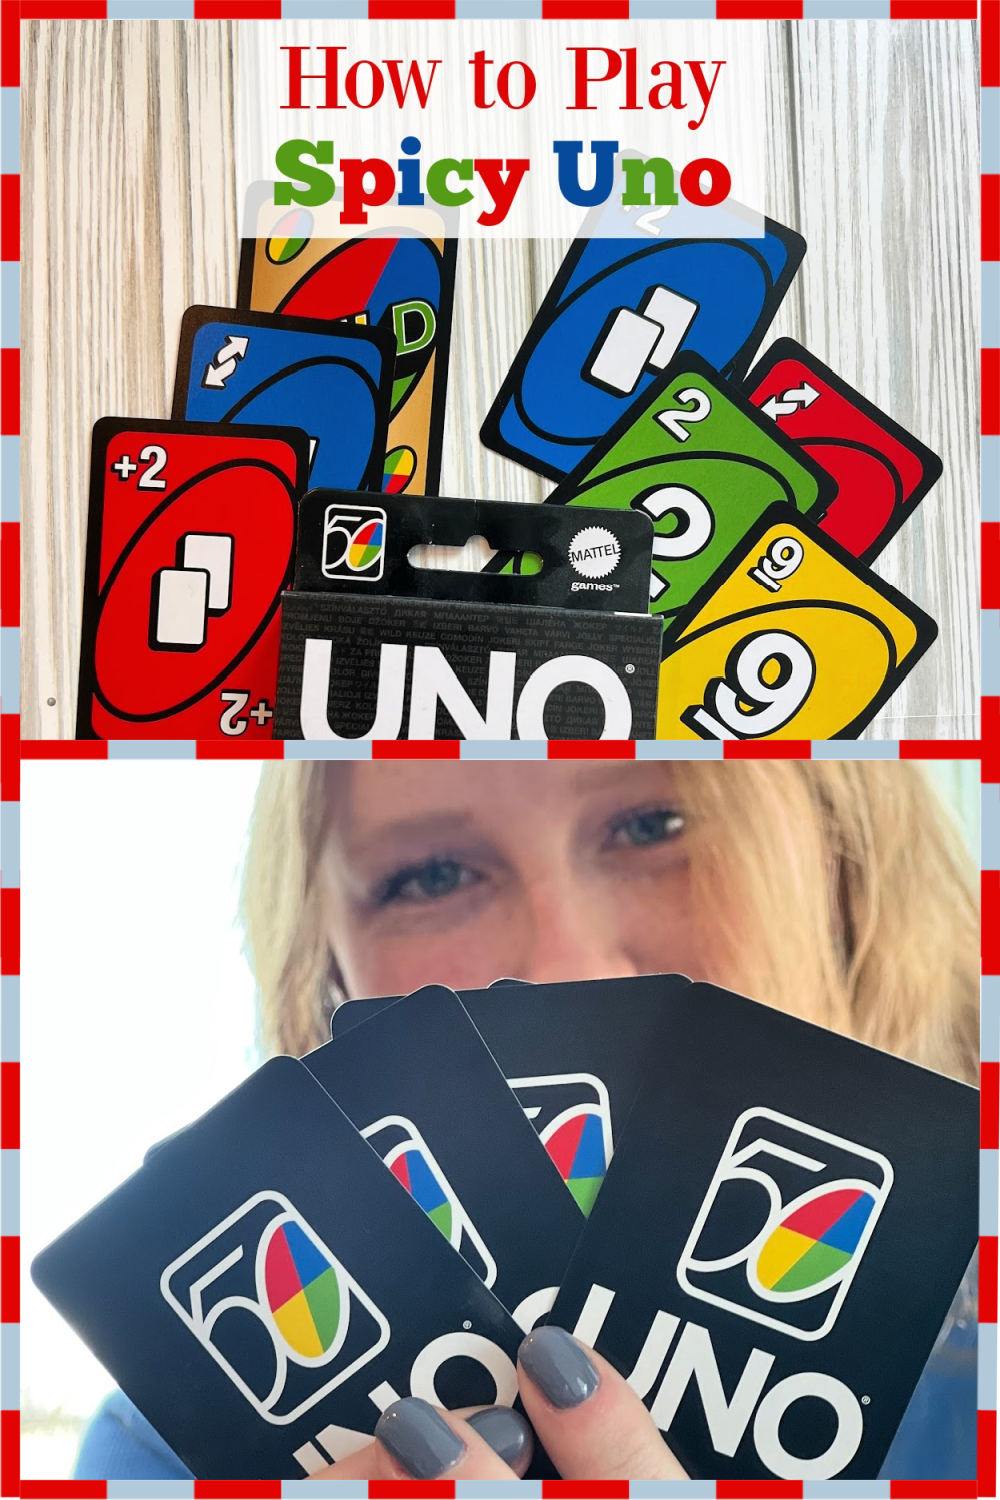 How to Play Spicy Uno: